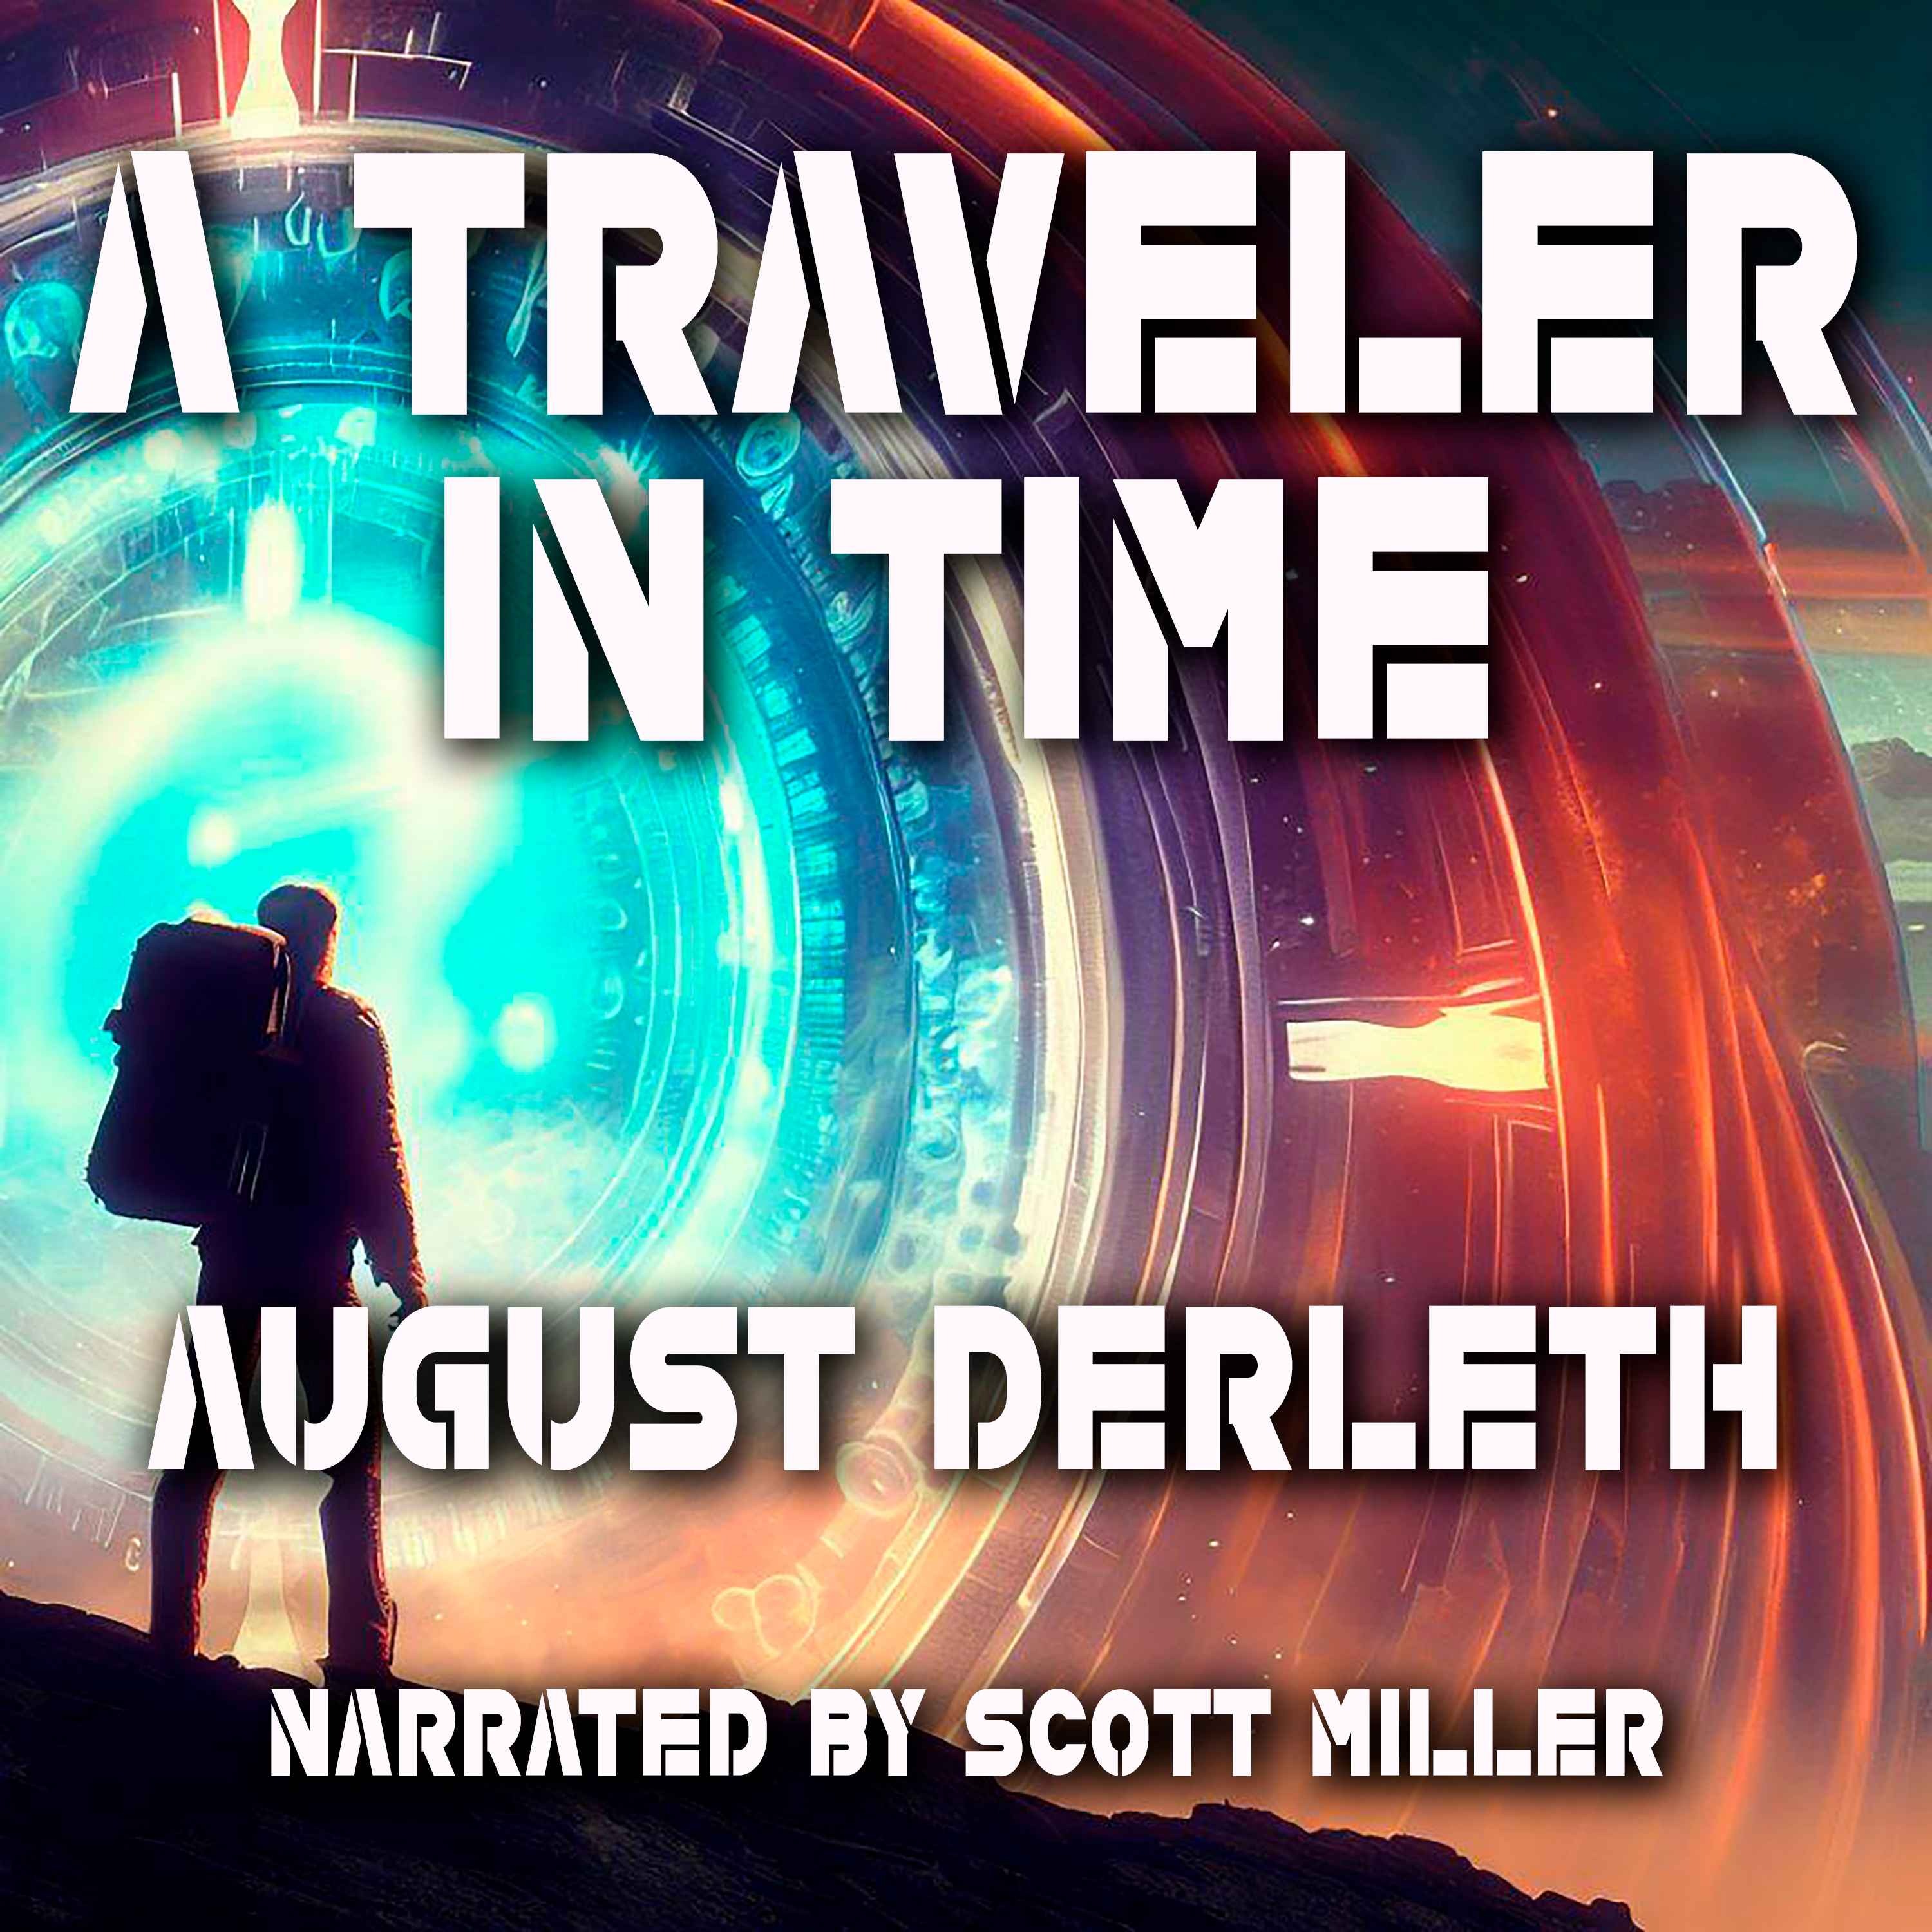 A Traveler in Time by August Derleth - Time Travel Audiobook